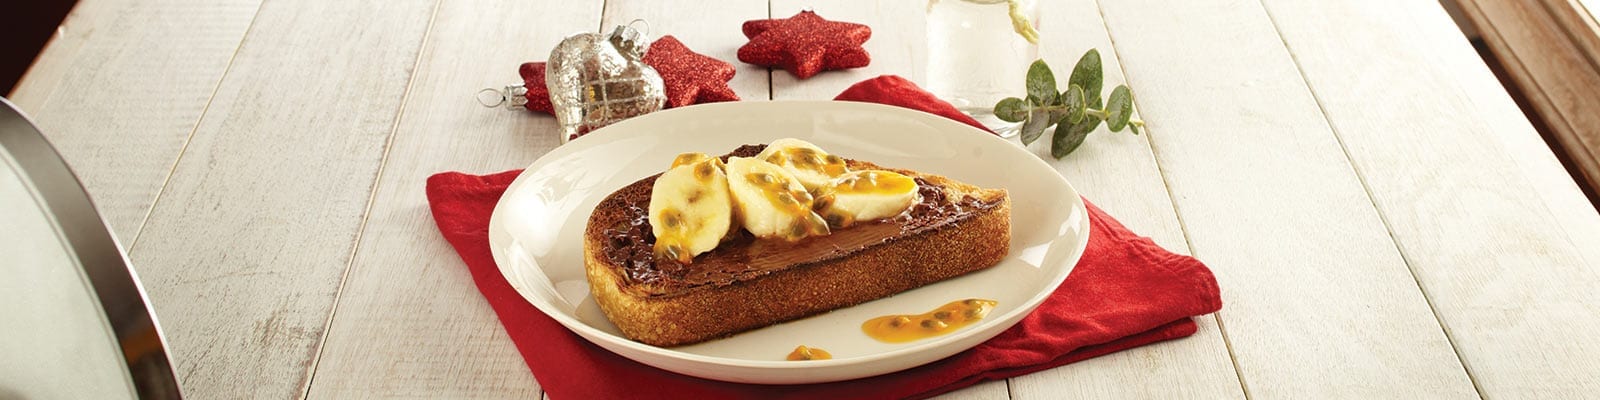 Toasted Sourdough with Nutella® hazelnut spread, Baked Bananas and Passion Fruit